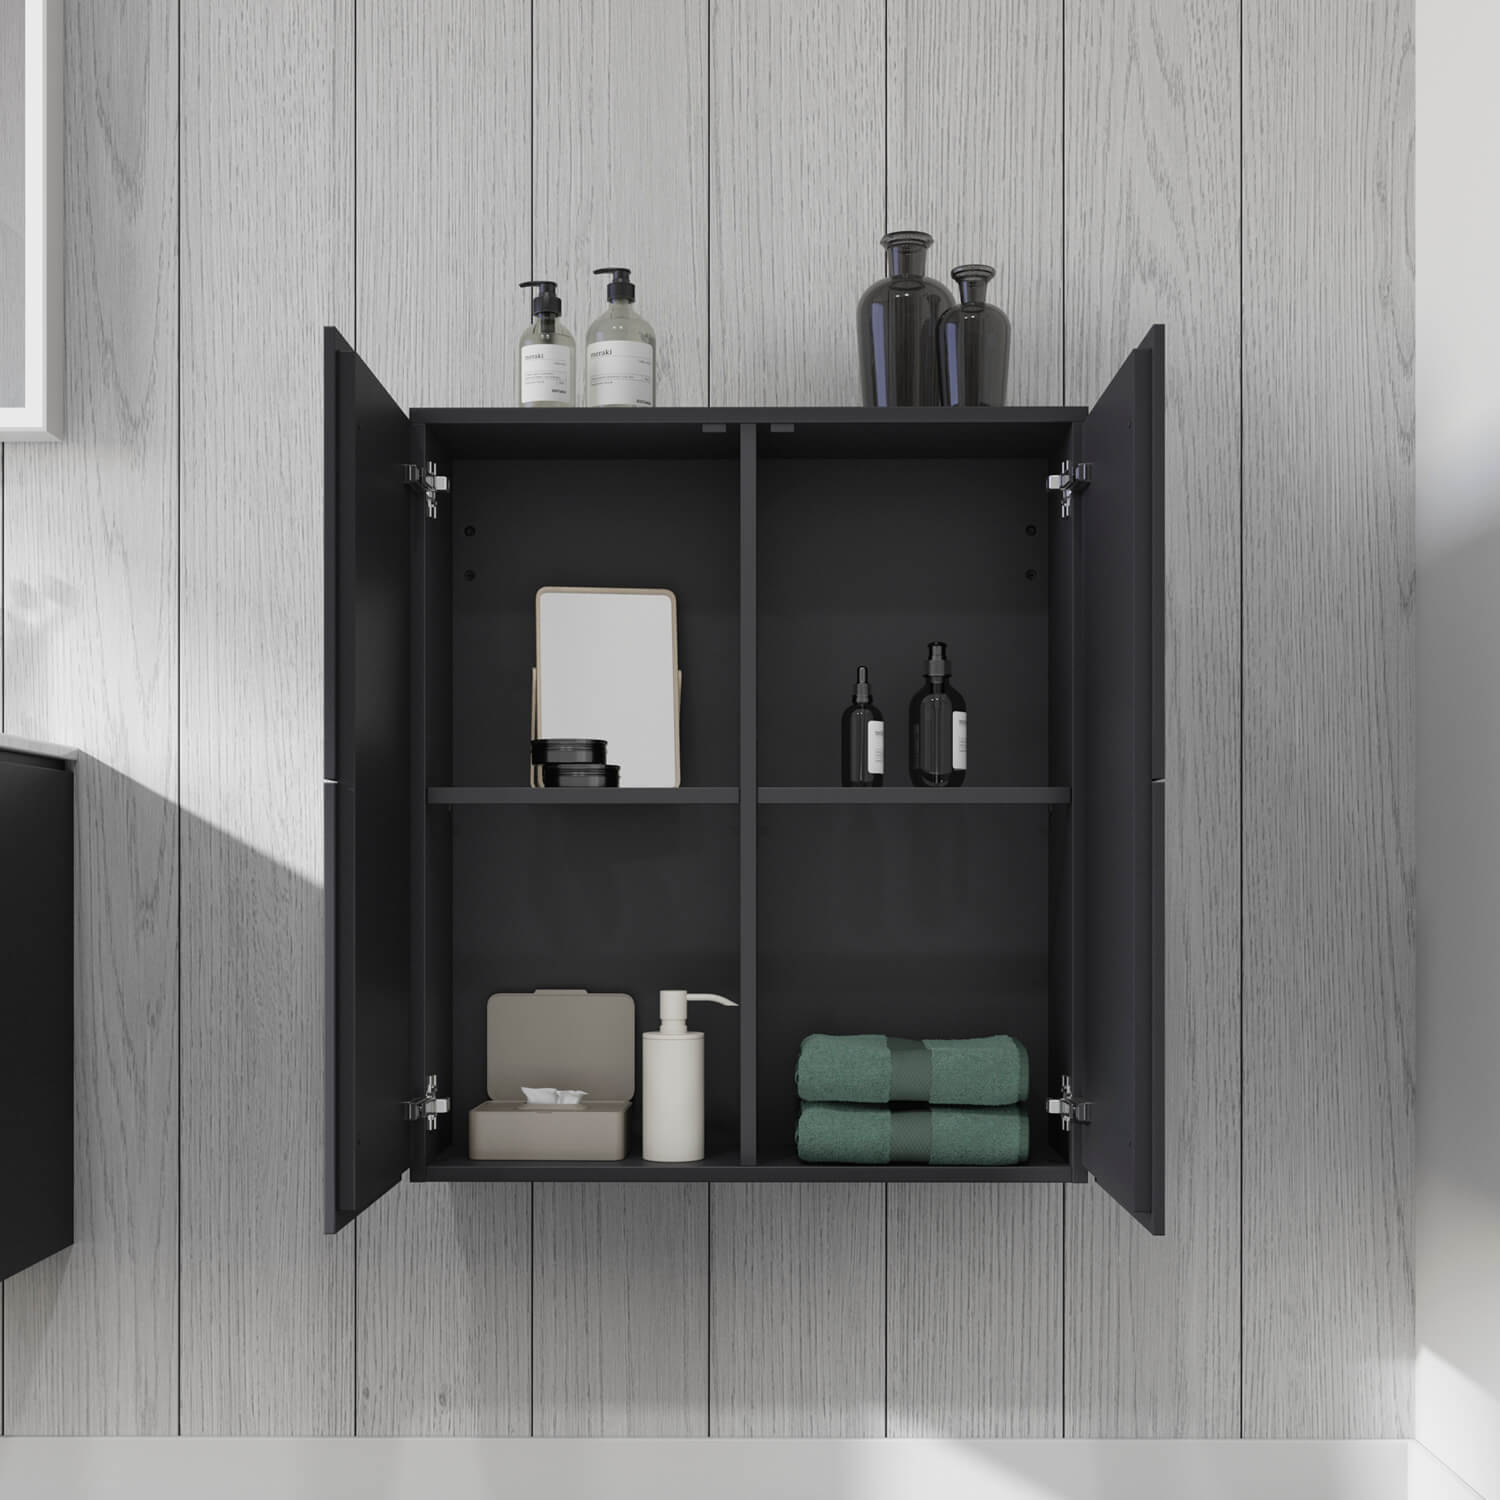 Square semi-tall cabinet wall mounted
